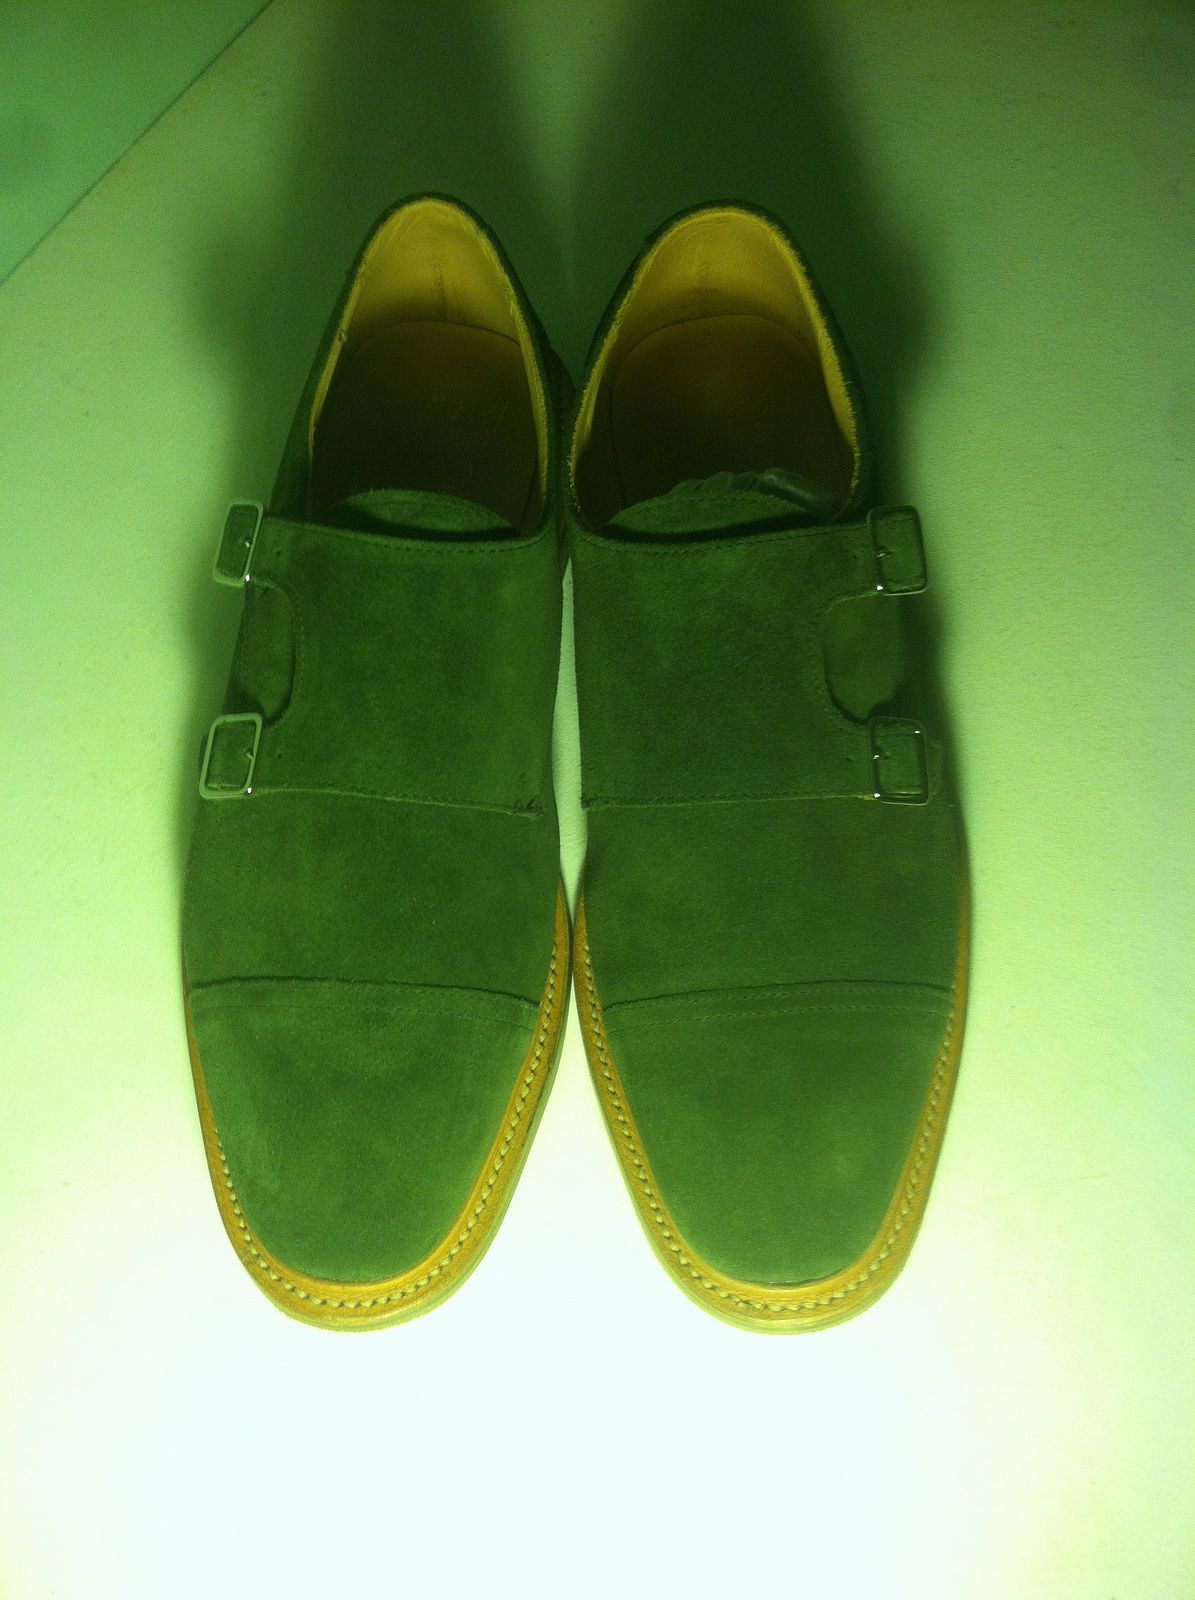 Mark Mcnairy New Amsterdam Loden Suede Double Monk Strap Size US 11 / EU 44 - 11 Preview